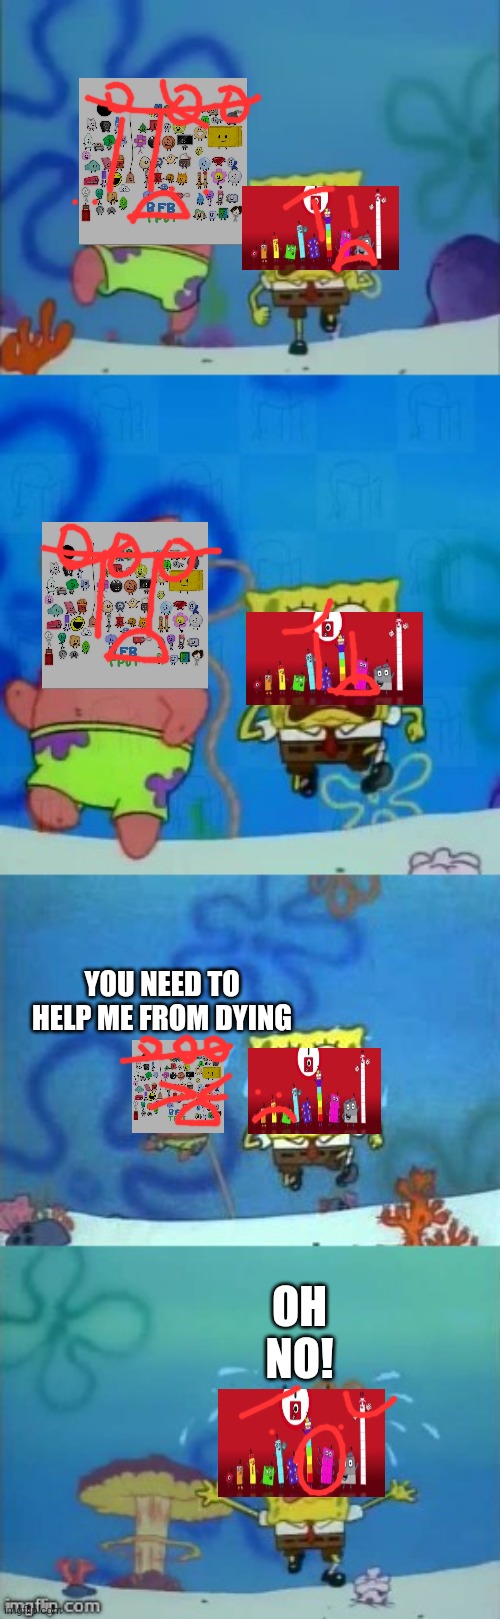 When bfdi:baby fairy land and numberblocks end crossover | OH NO! YOU NEED TO HELP ME FROM DYING | image tagged in spongebob and patrick running | made w/ Imgflip meme maker